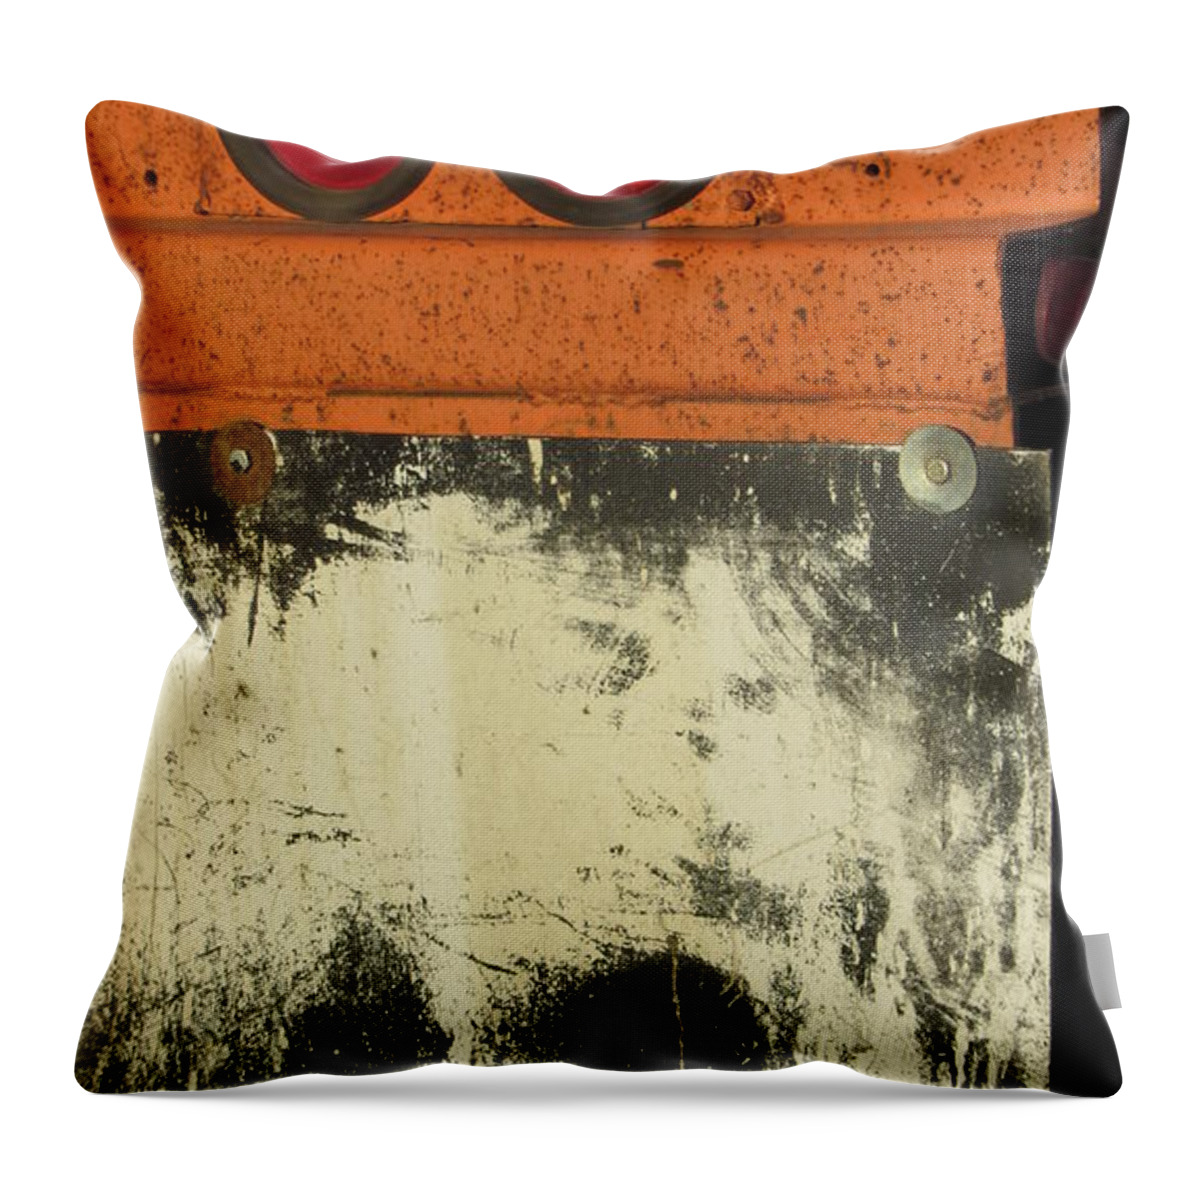 Abstract Throw Pillow featuring the photograph Tail Light Abstract 2 by Anita Burgermeister